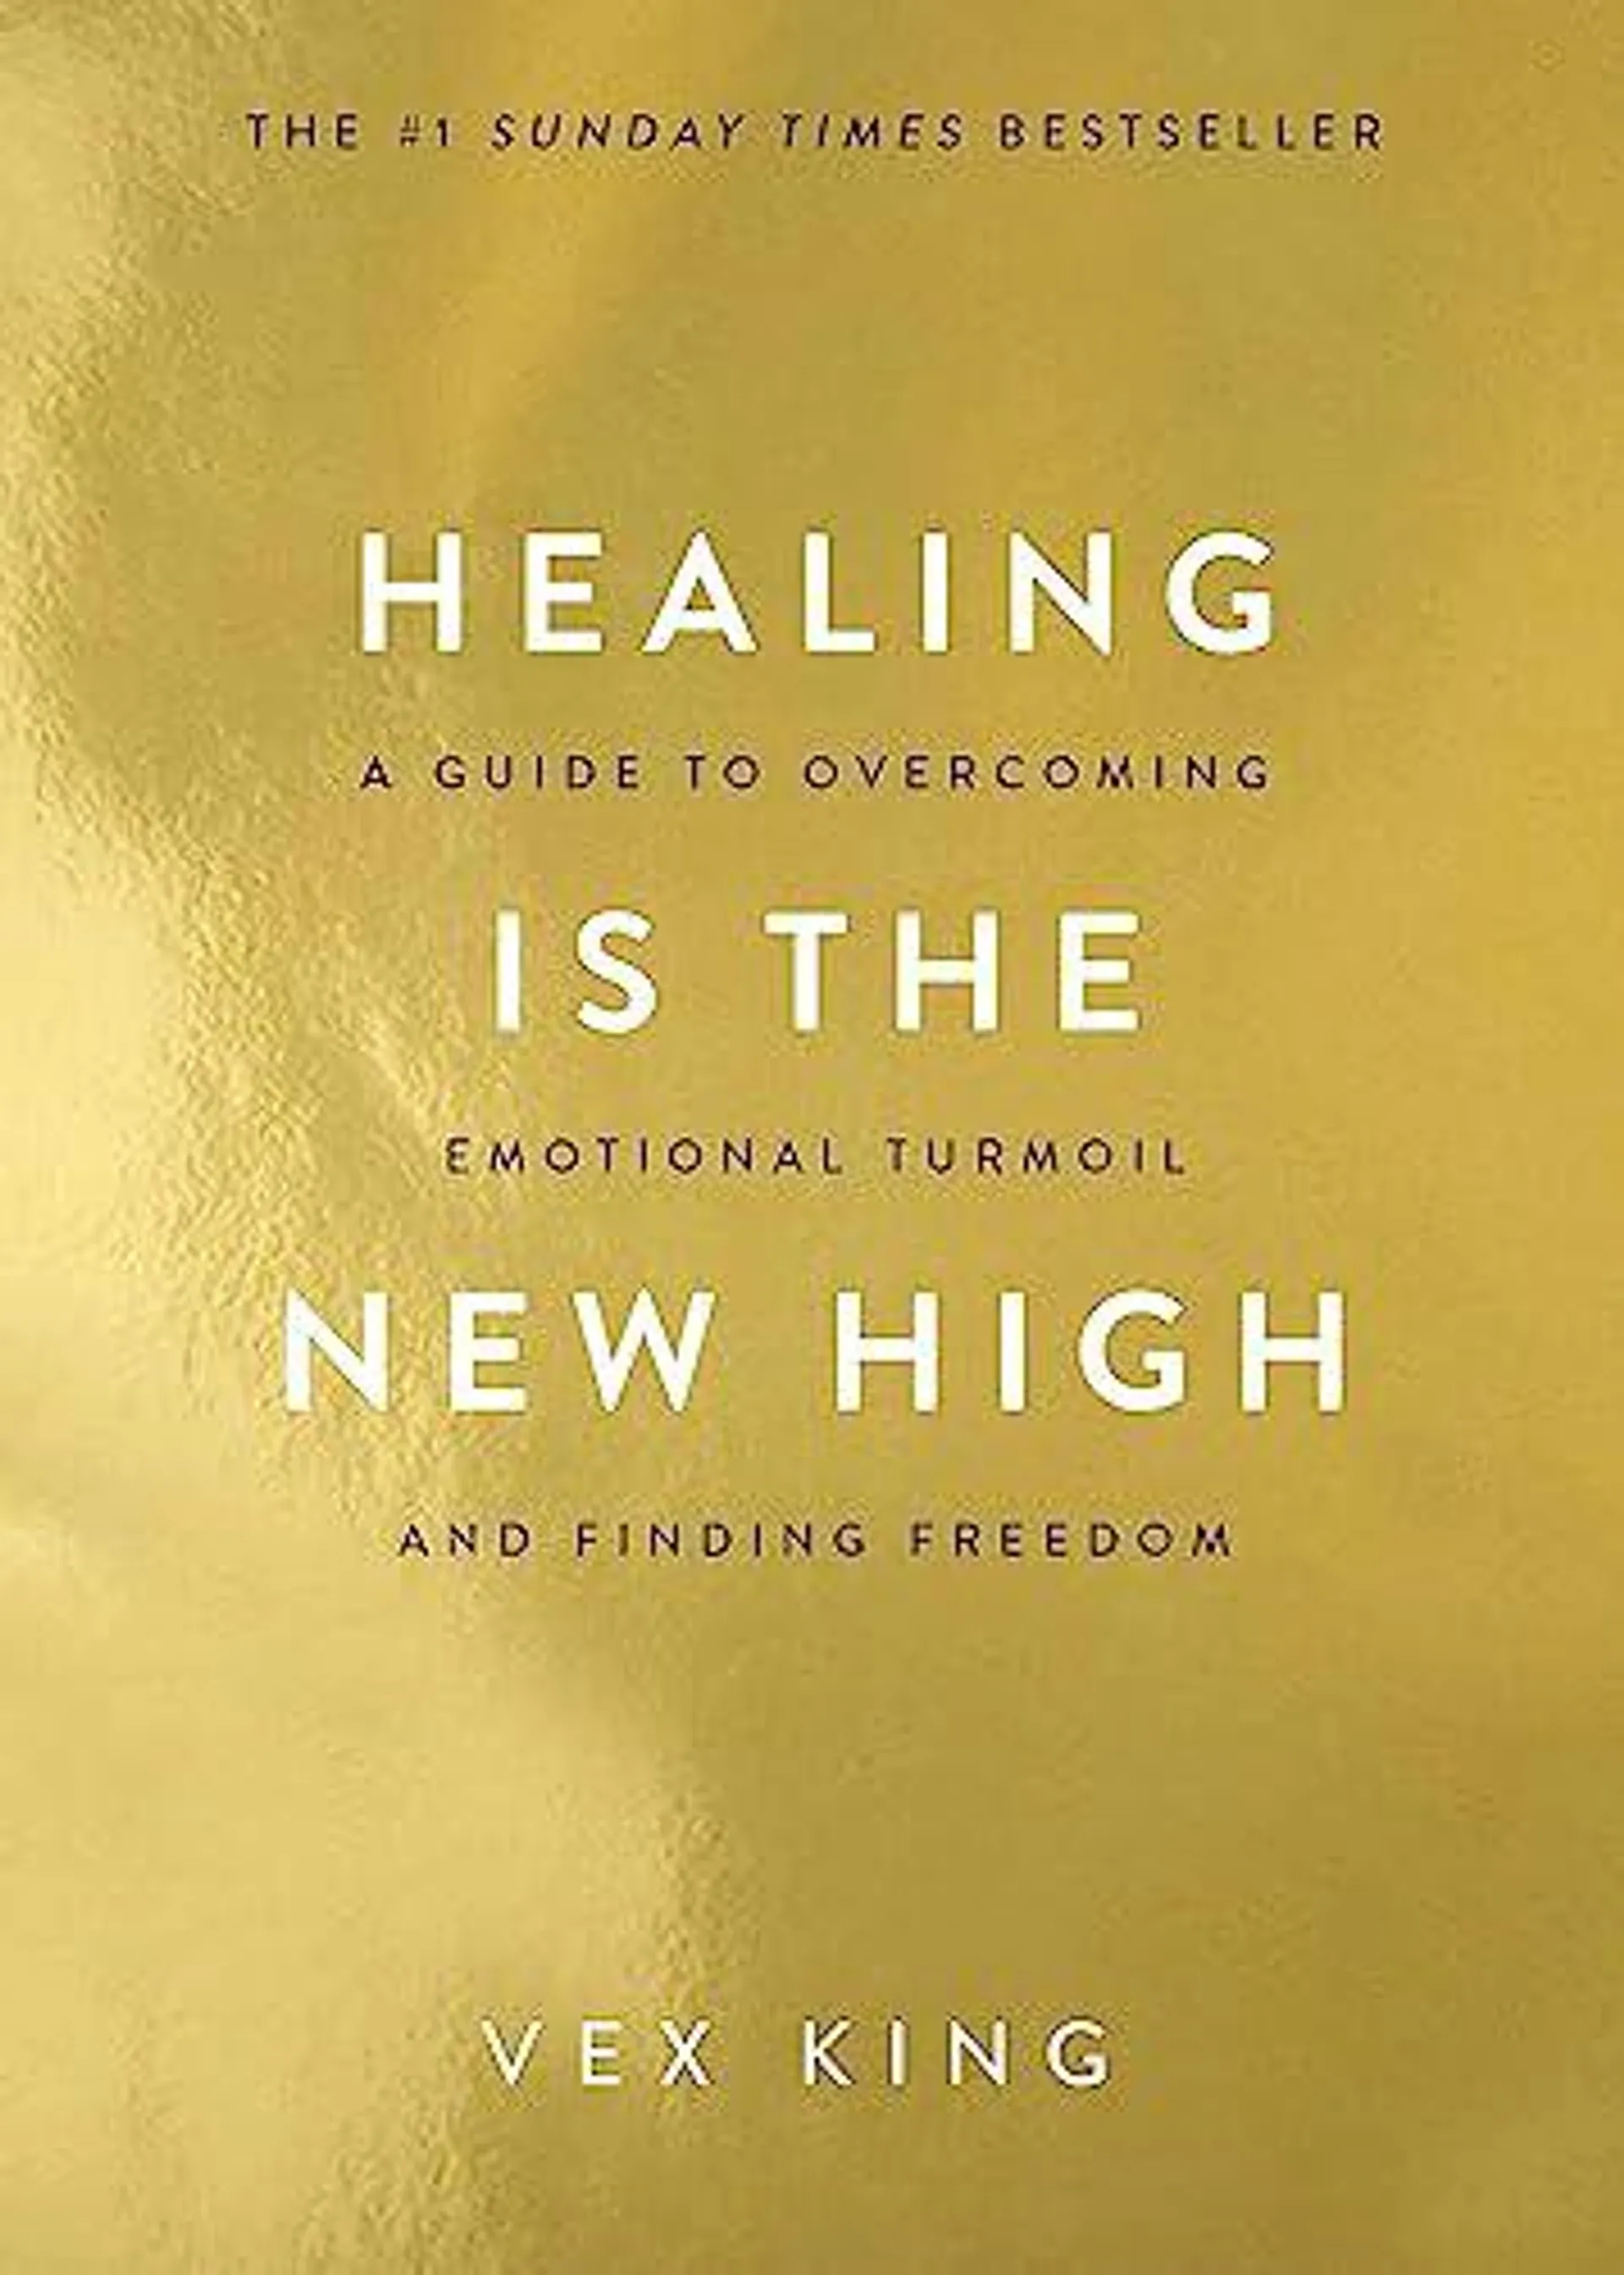 Healing Is the New High by Vex King